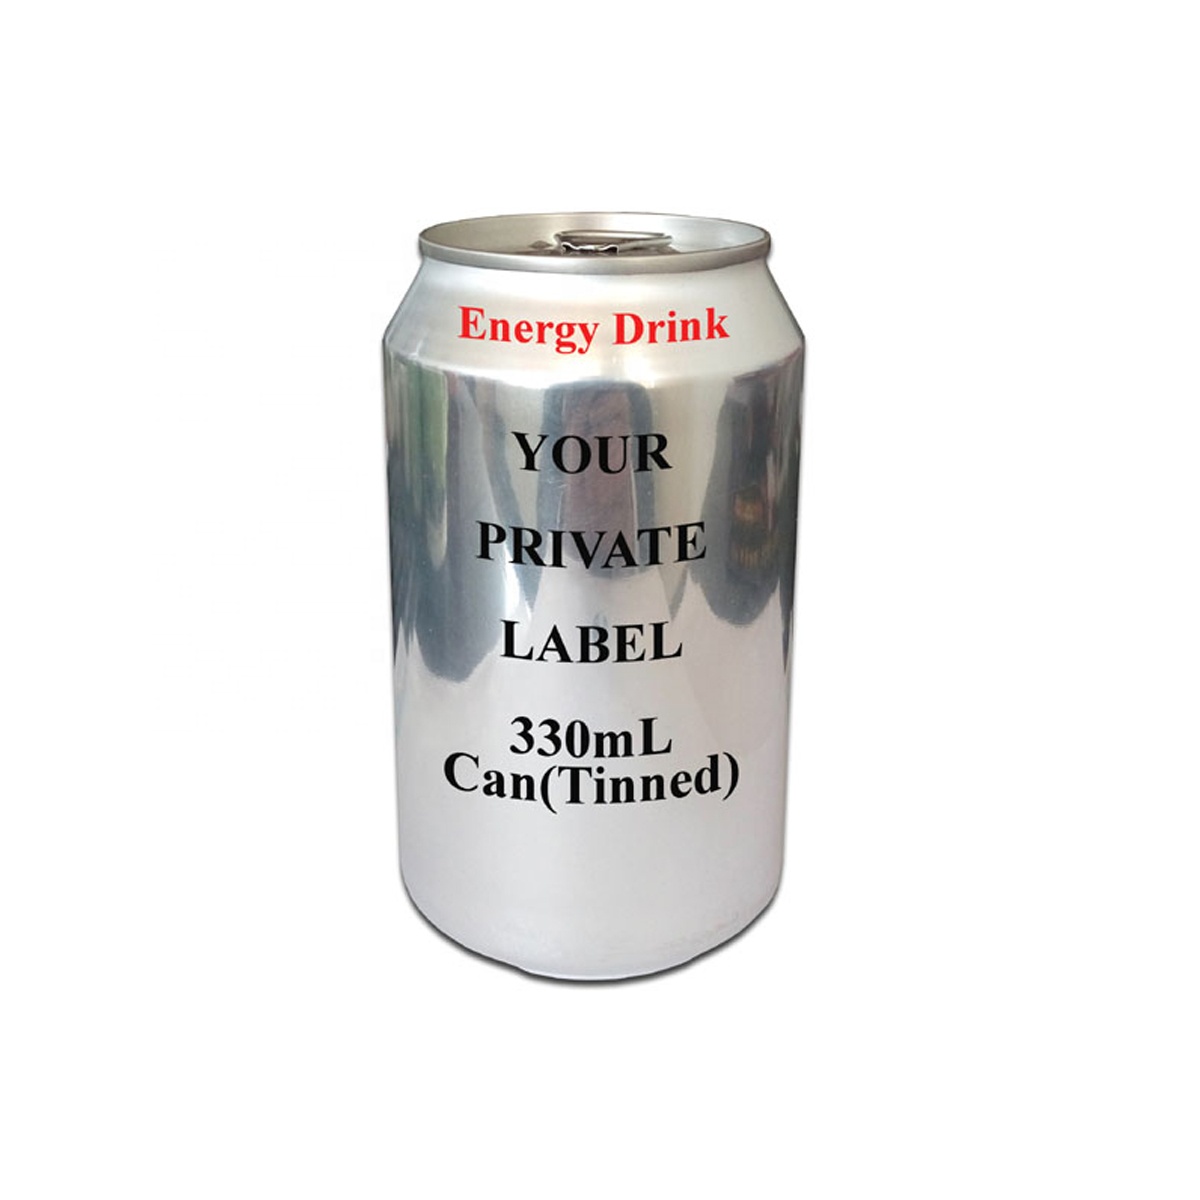 Private Label Carbonated Energy Drink with Taurine in 330ml Can(Tinned) products,China Private